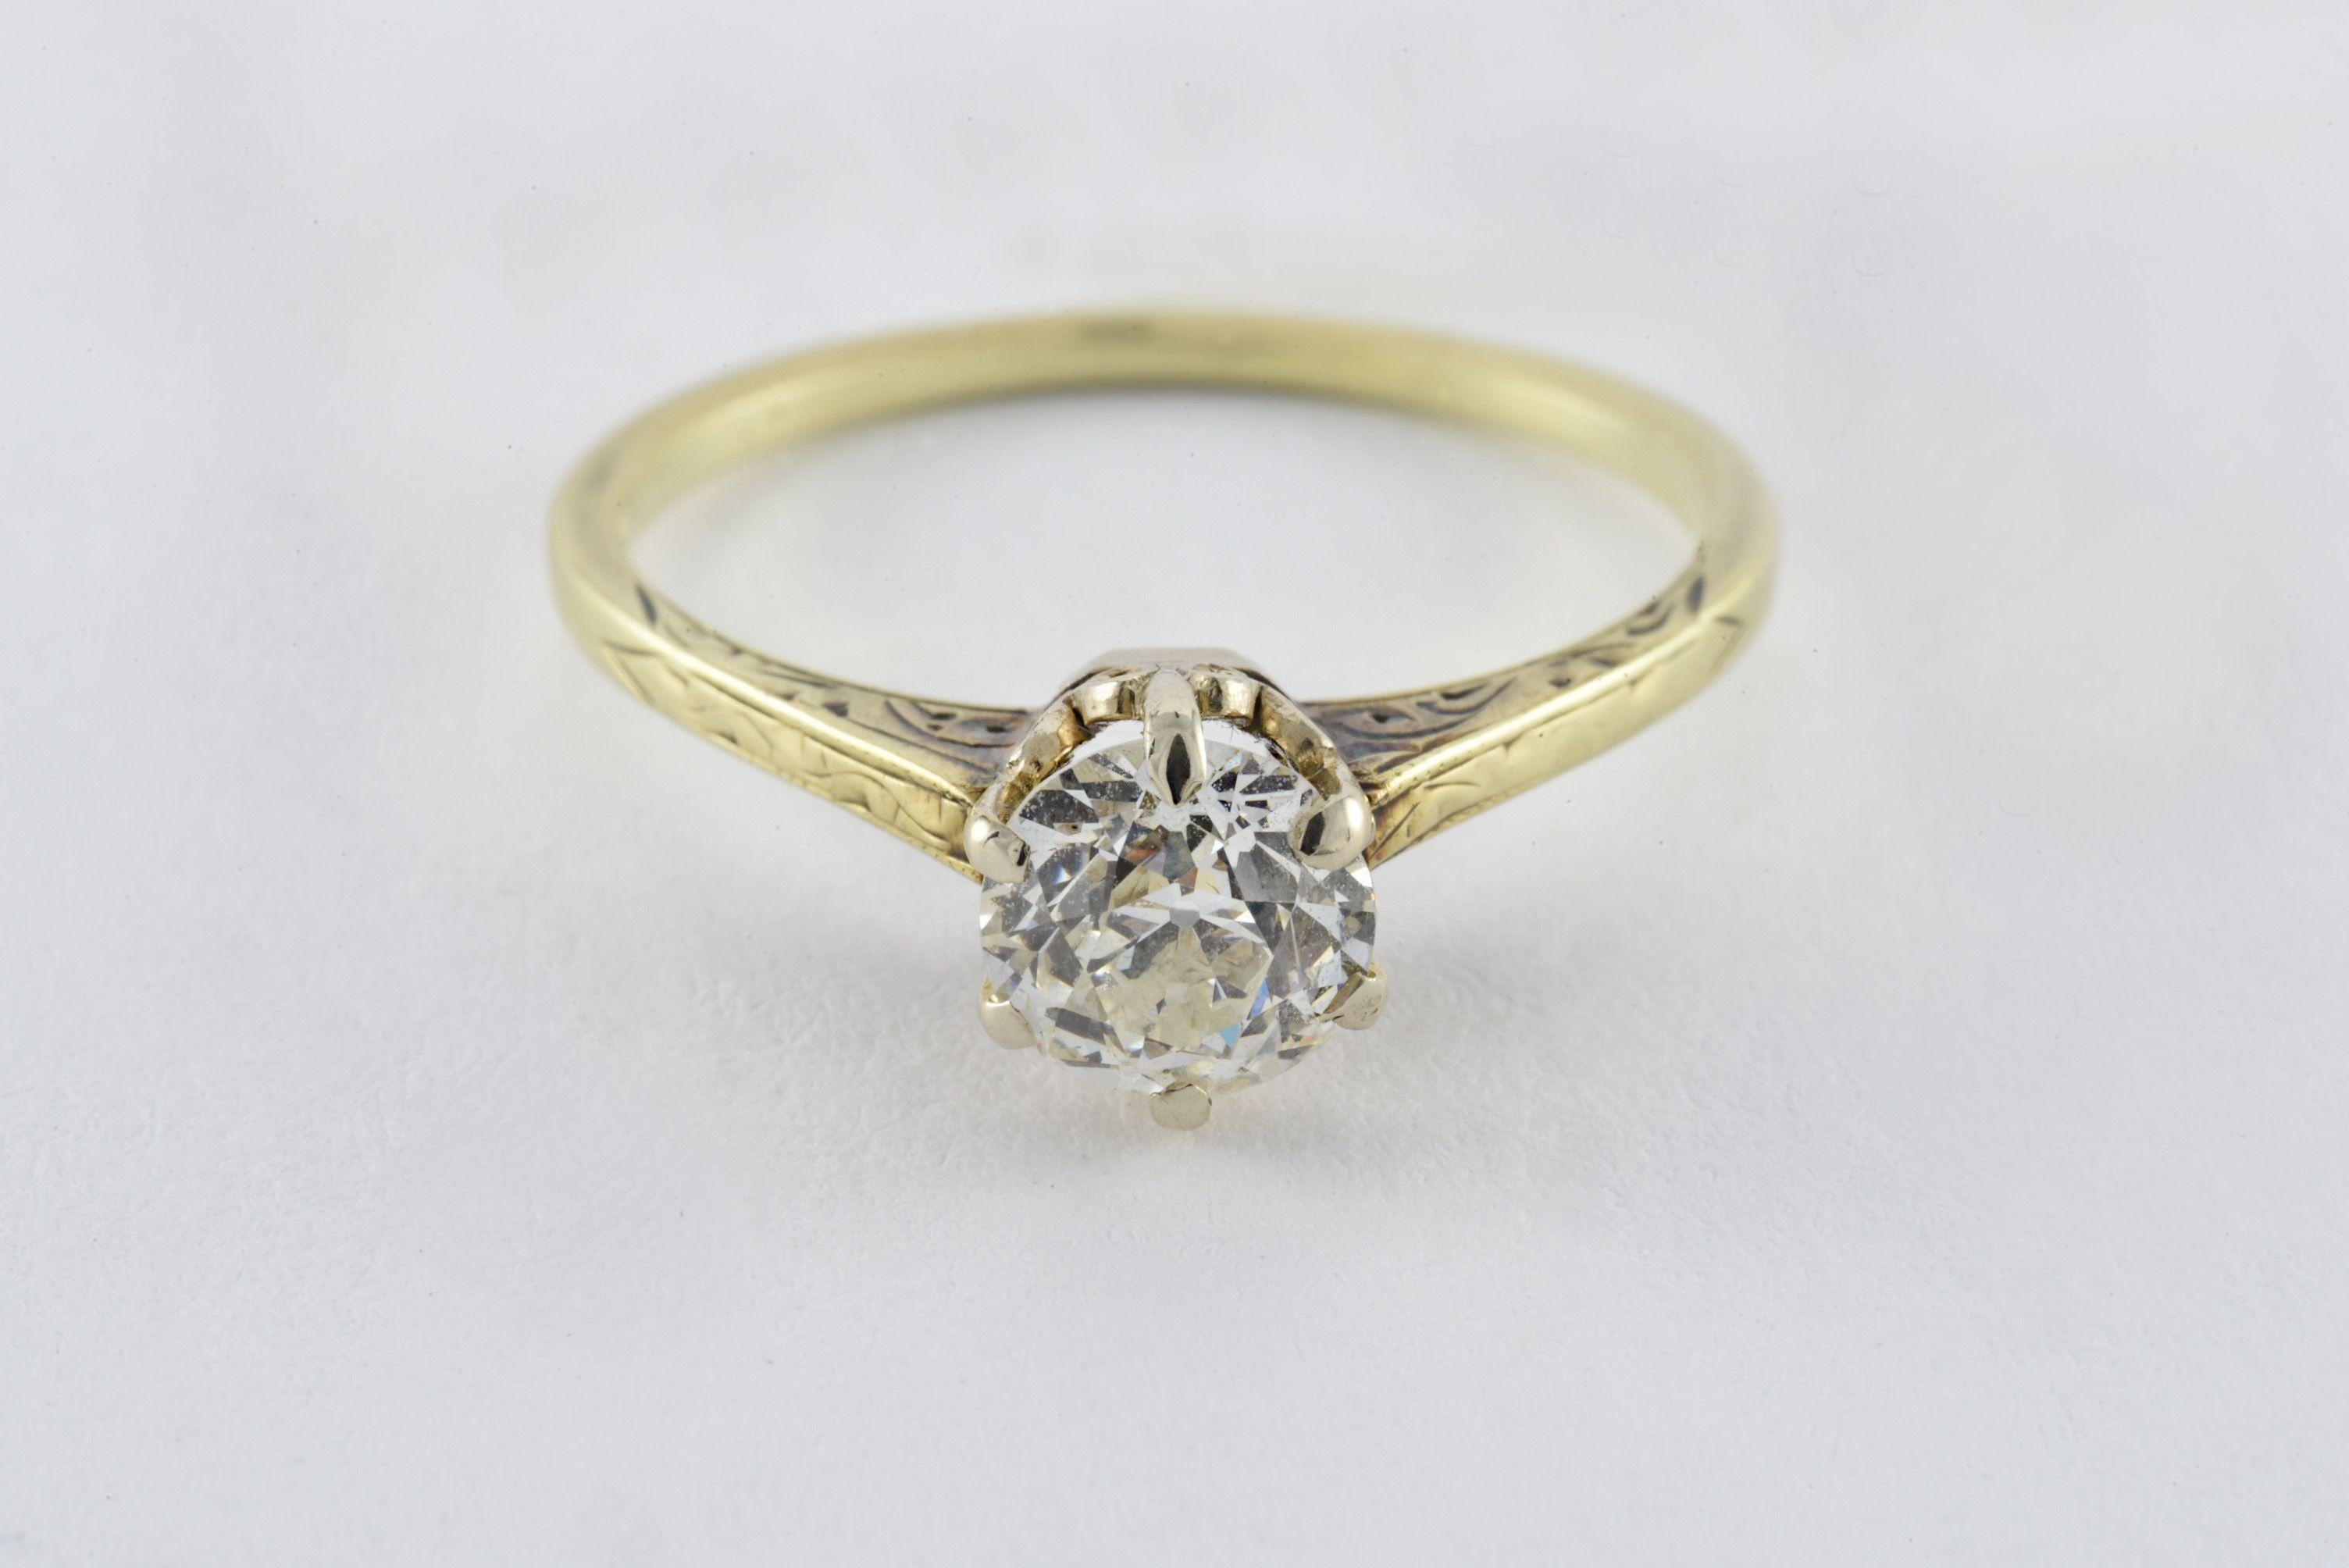 This classic antique solitaire diamond ring features an Old European cut diamond measuring approximately 0.96 carats, I color, SI1 clarity, 6.18 x 6.29 x 3.91 mm, crafted in a delicate crown six-prong setting atop a 14kt yellow gold band with